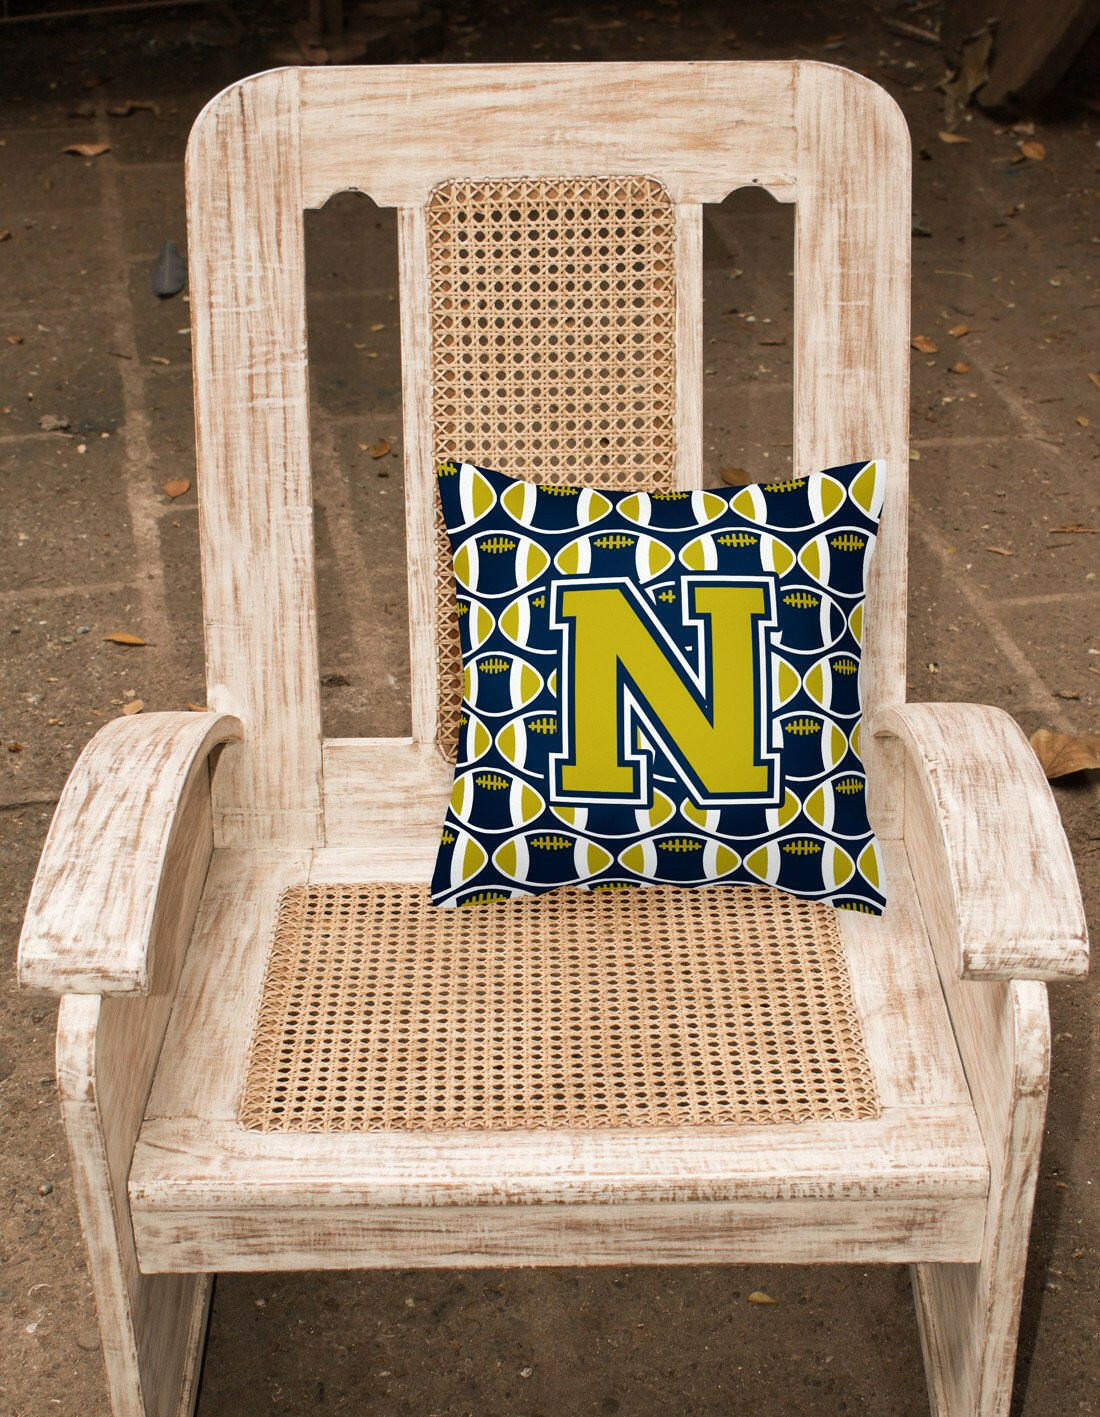 Letter N Football Blue and Gold Fabric Decorative Pillow CJ1074-NPW1414 by Caroline's Treasures